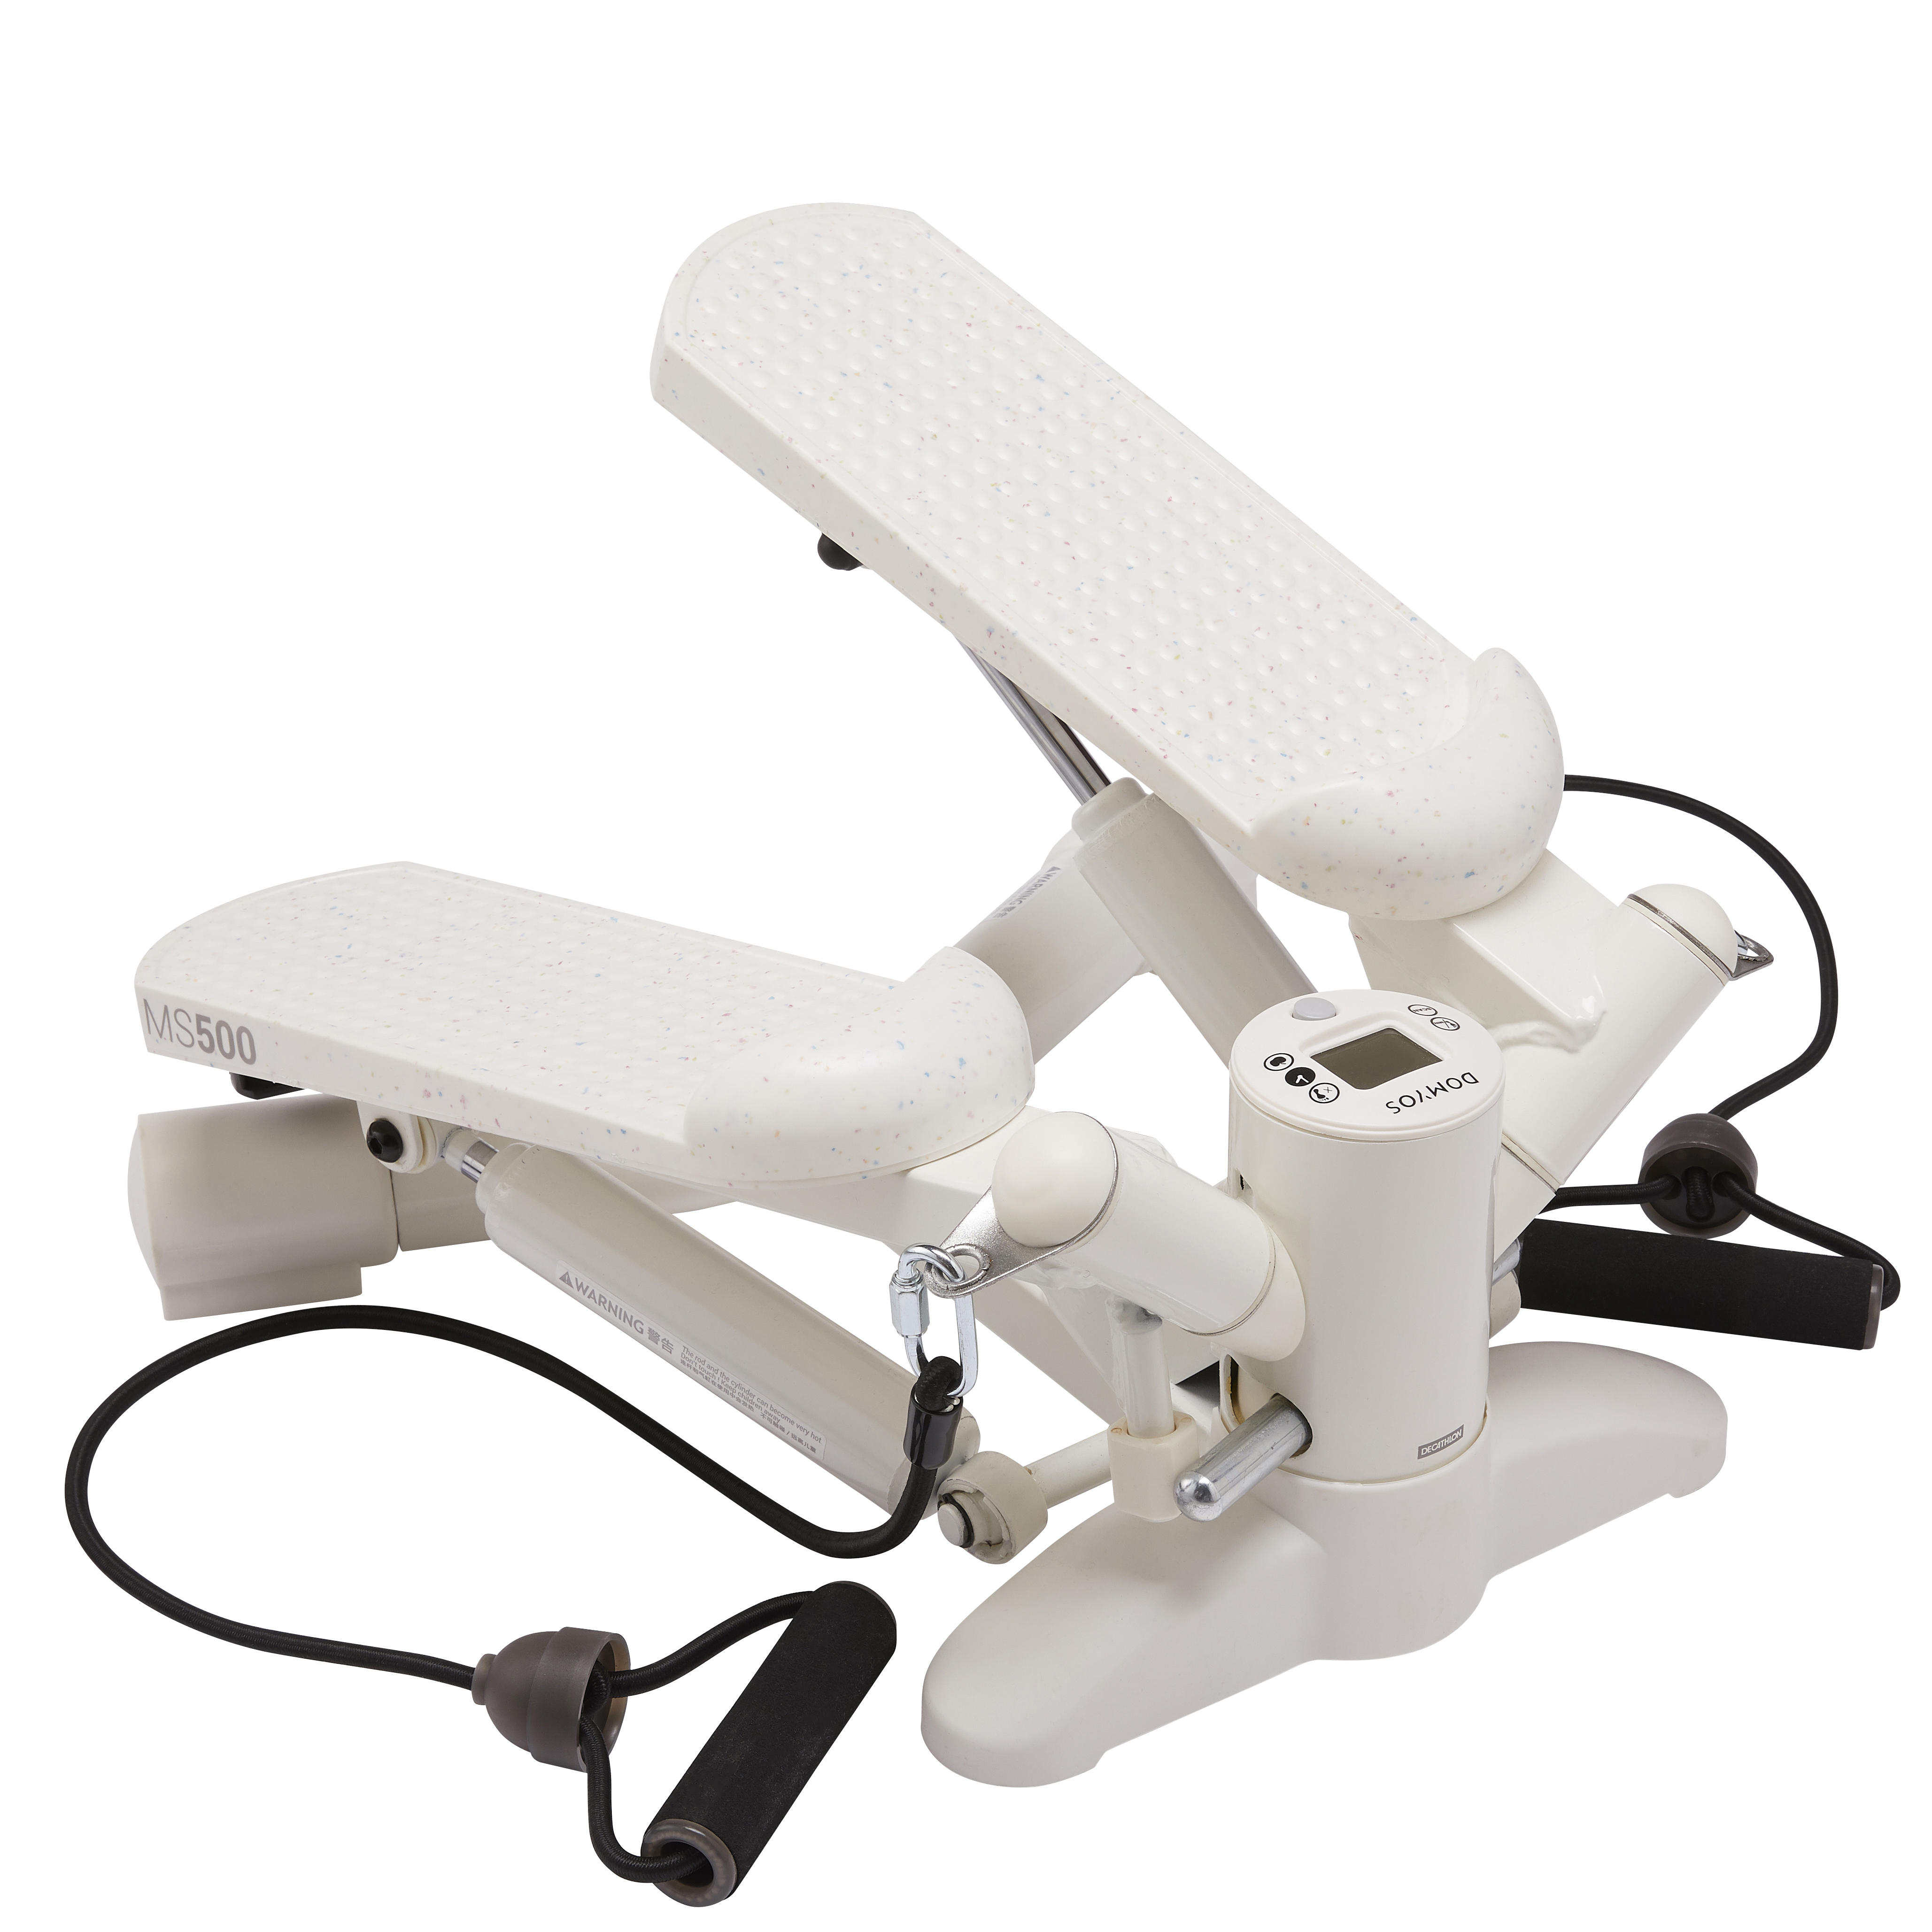 Domyos Mini Stepper MS100 Exercise & Arm Cords Stair Climber 